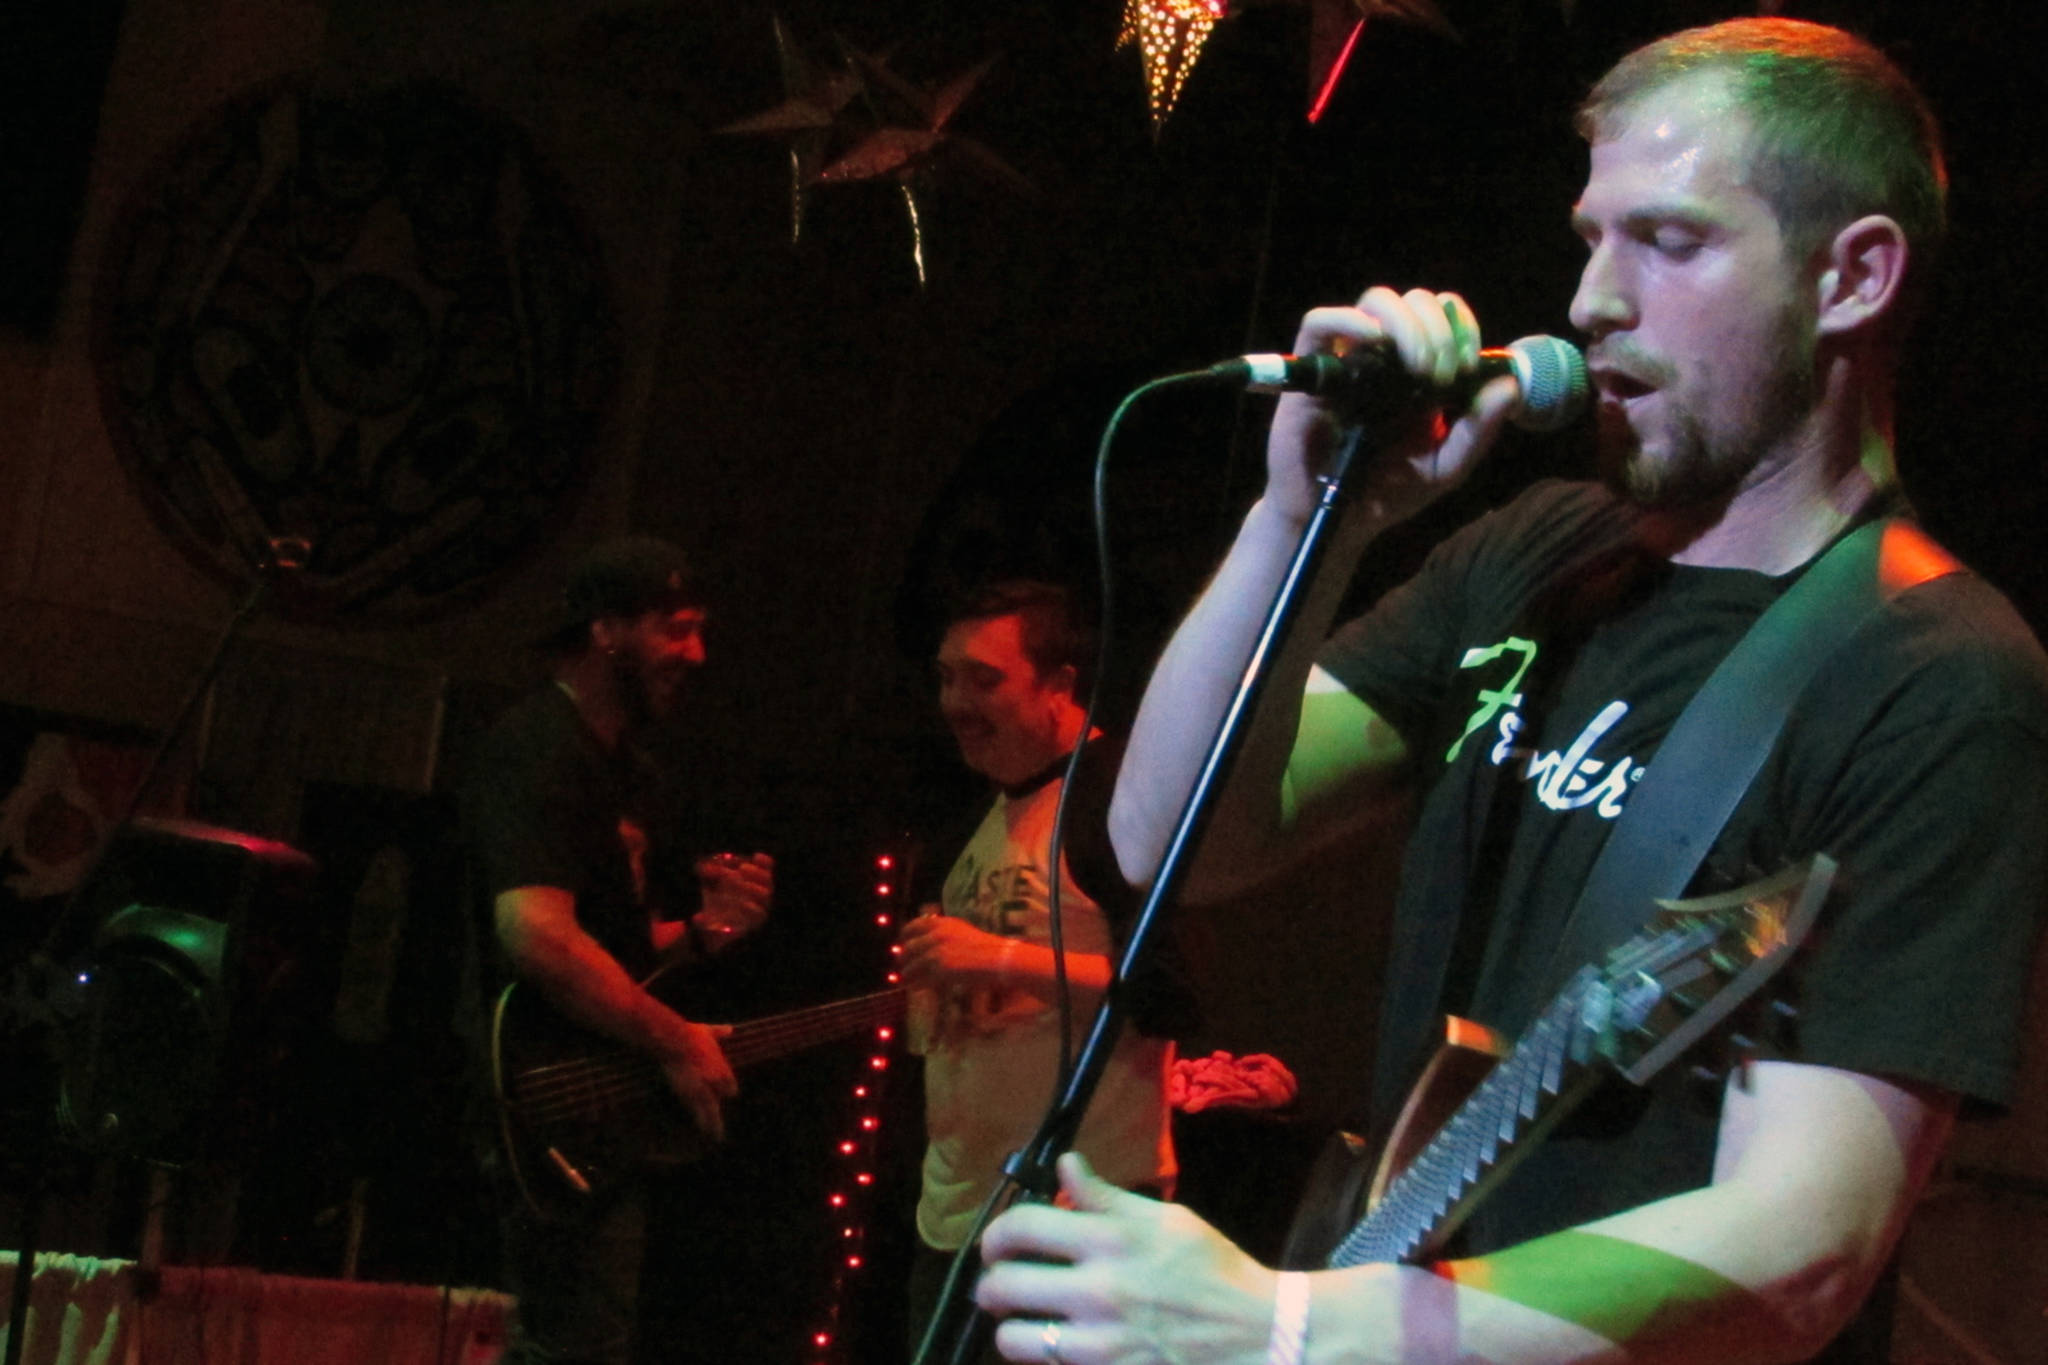 Fall Freakshow concert brings metal acts to the JACC